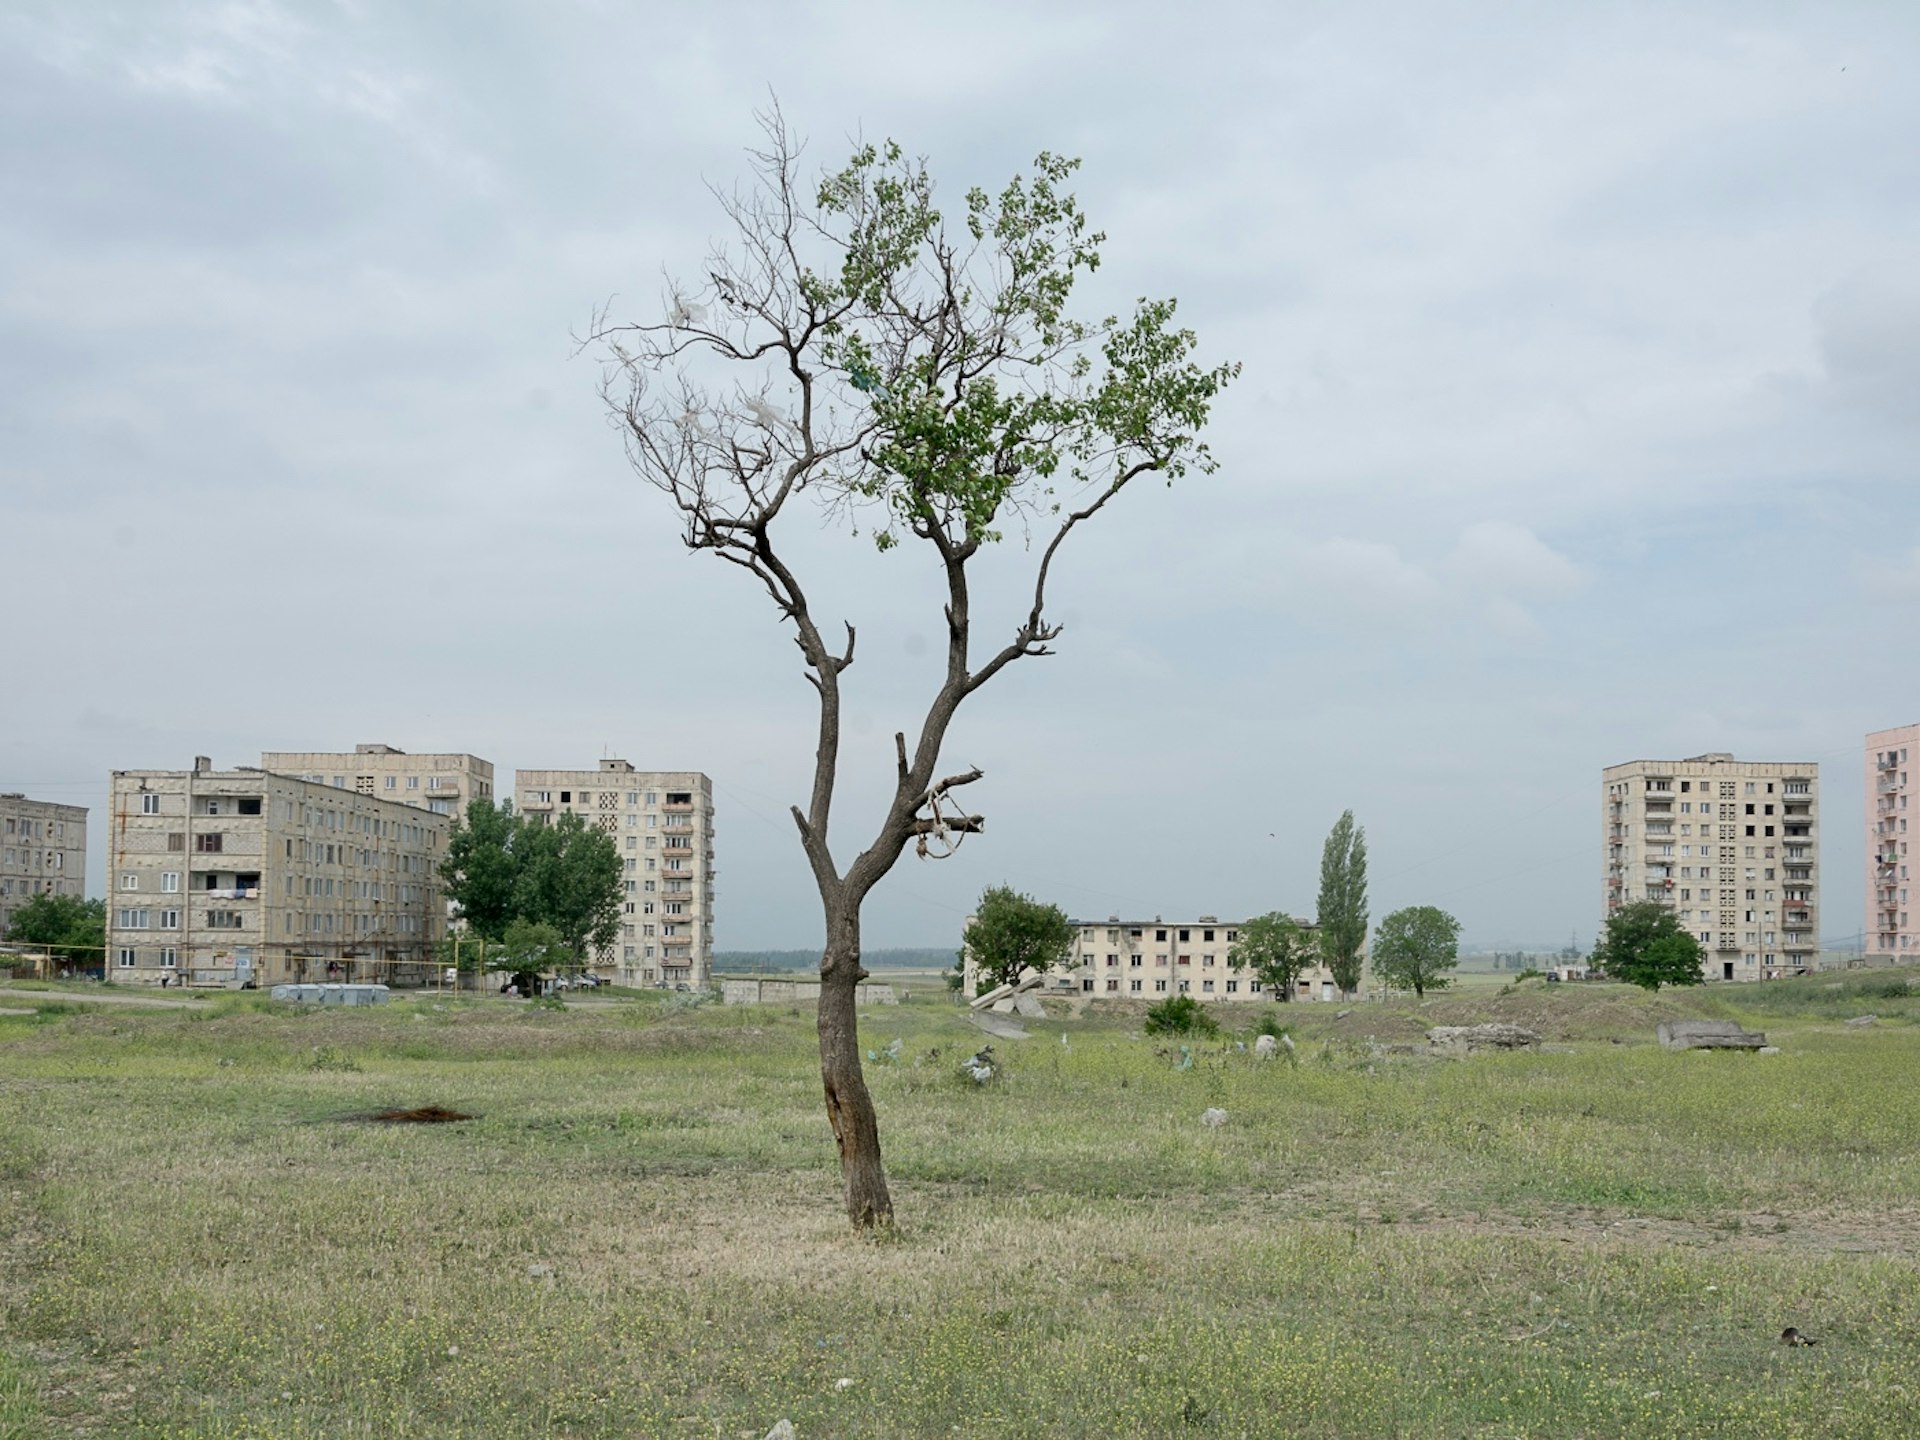 The forgotten housing estate that was once a Soviet utopia